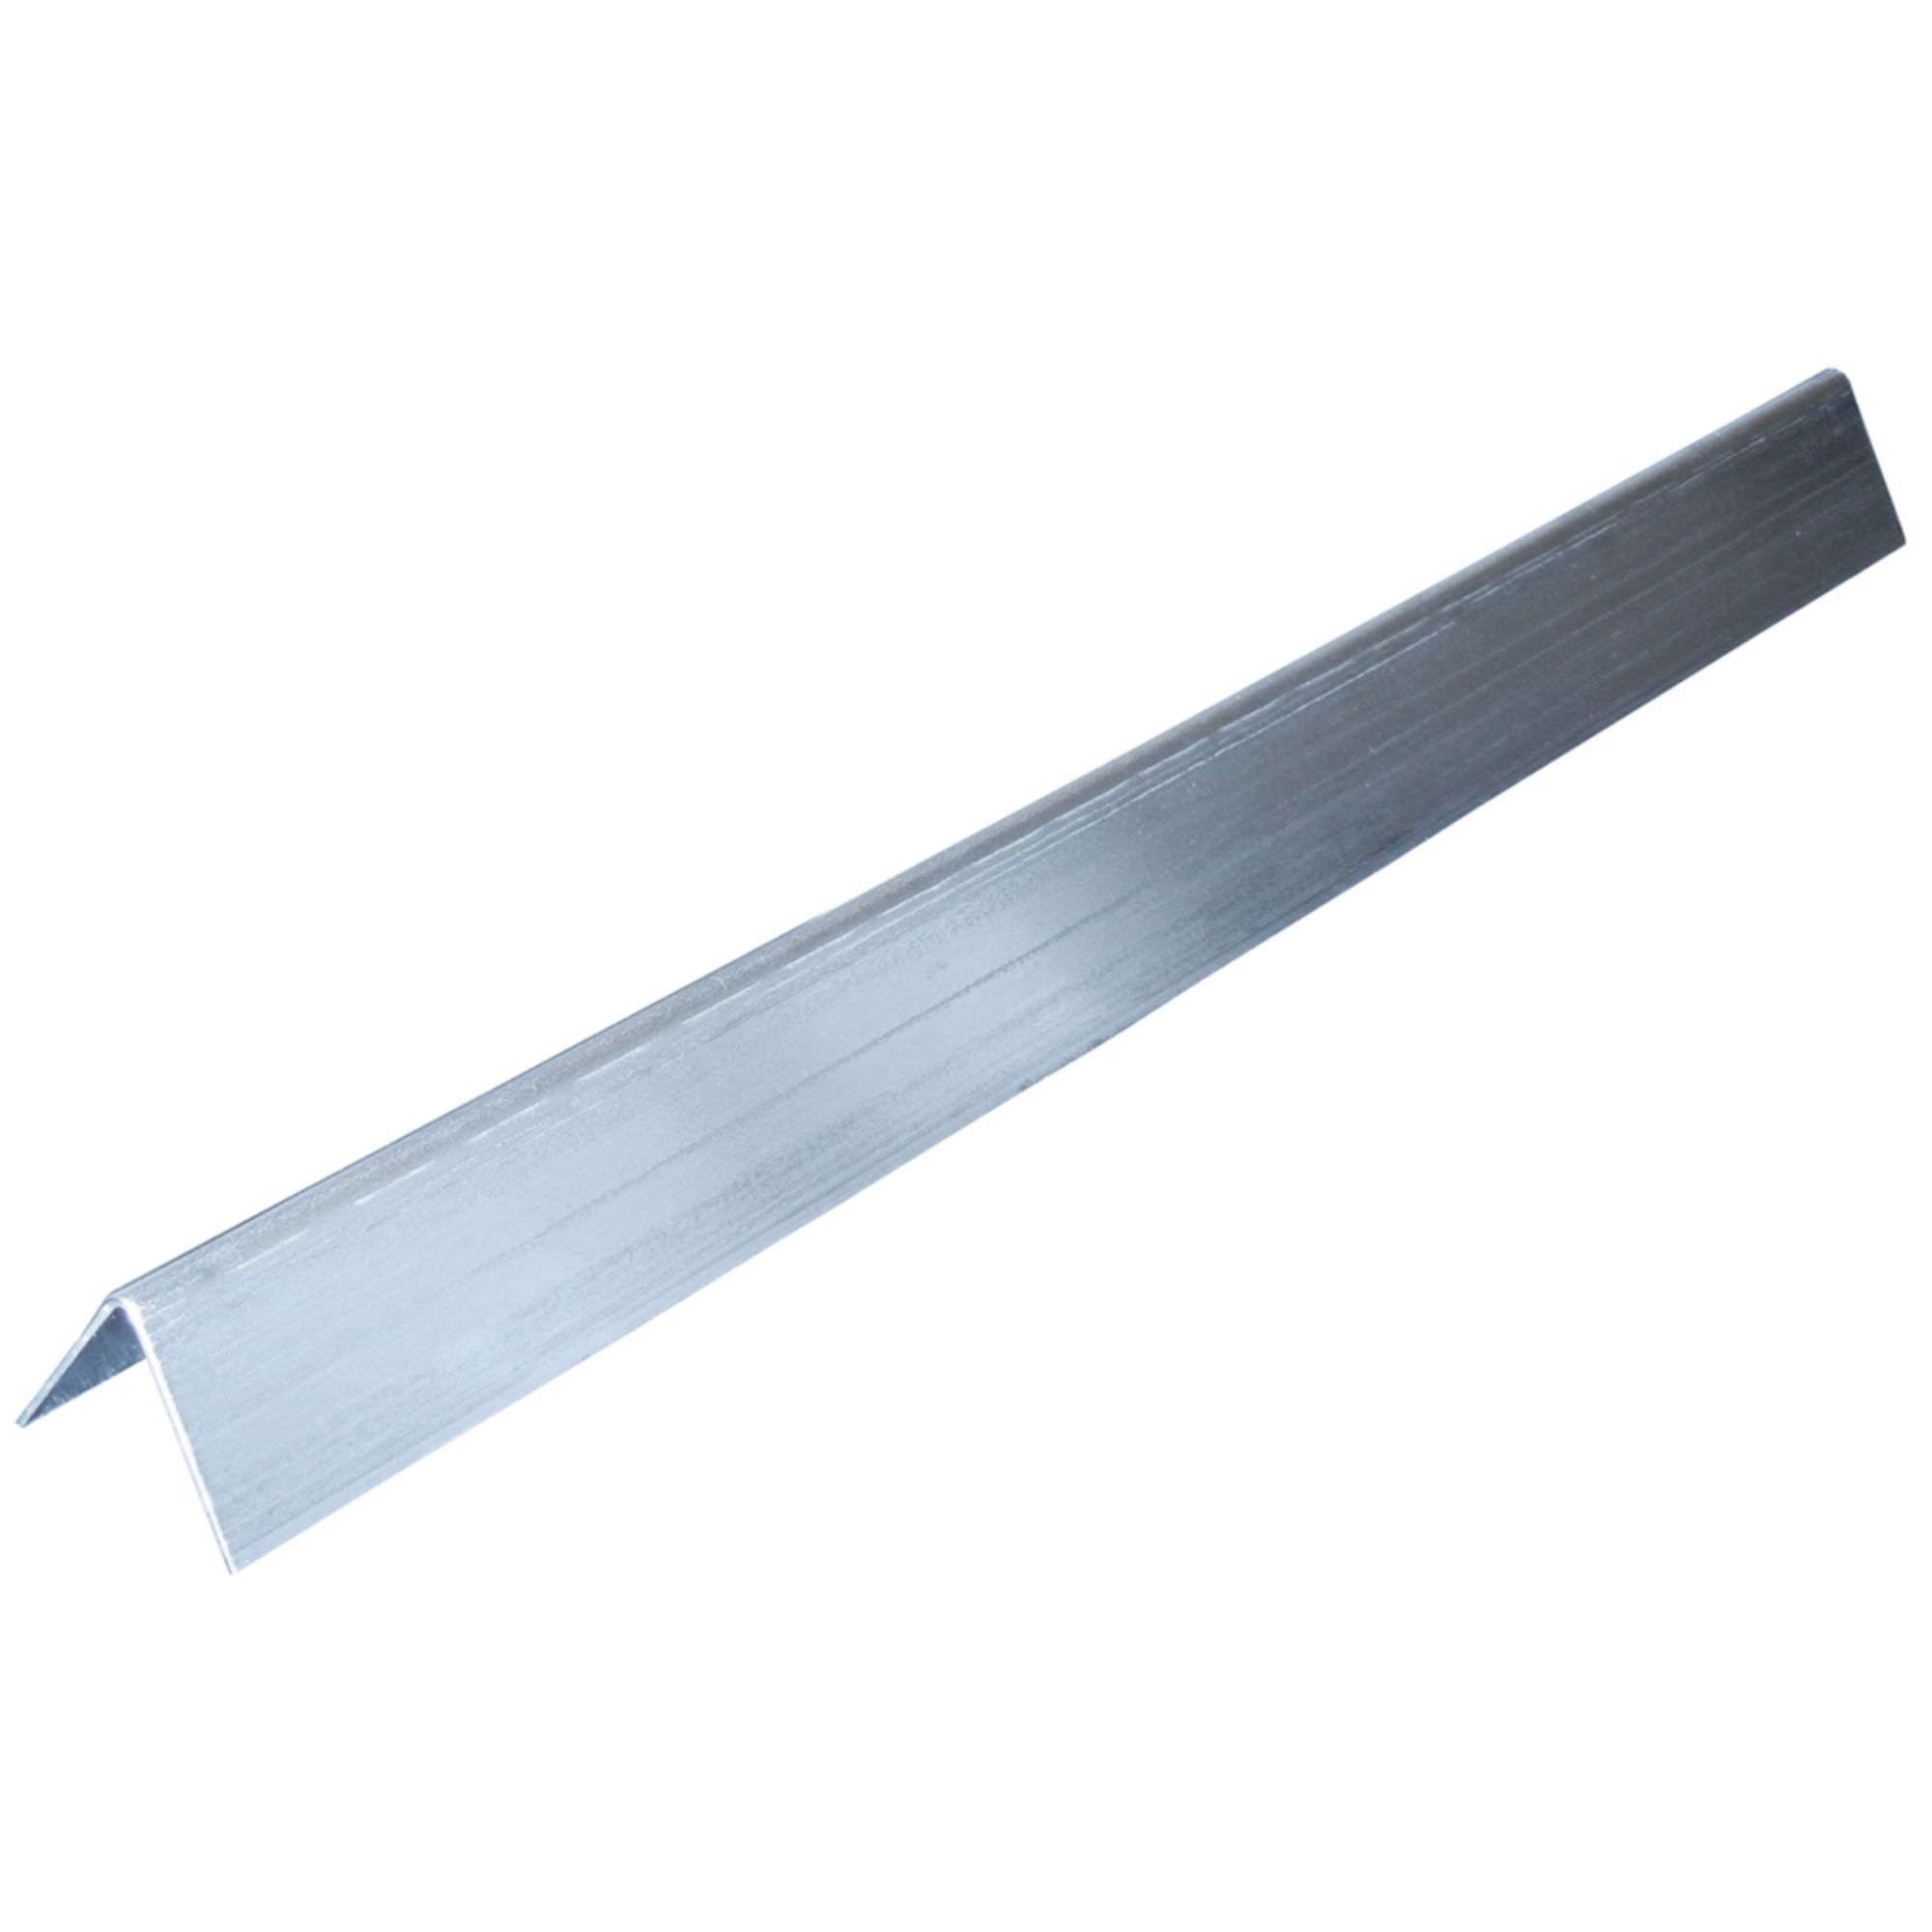 Stainless steel heat plate for Weber brand gas grills